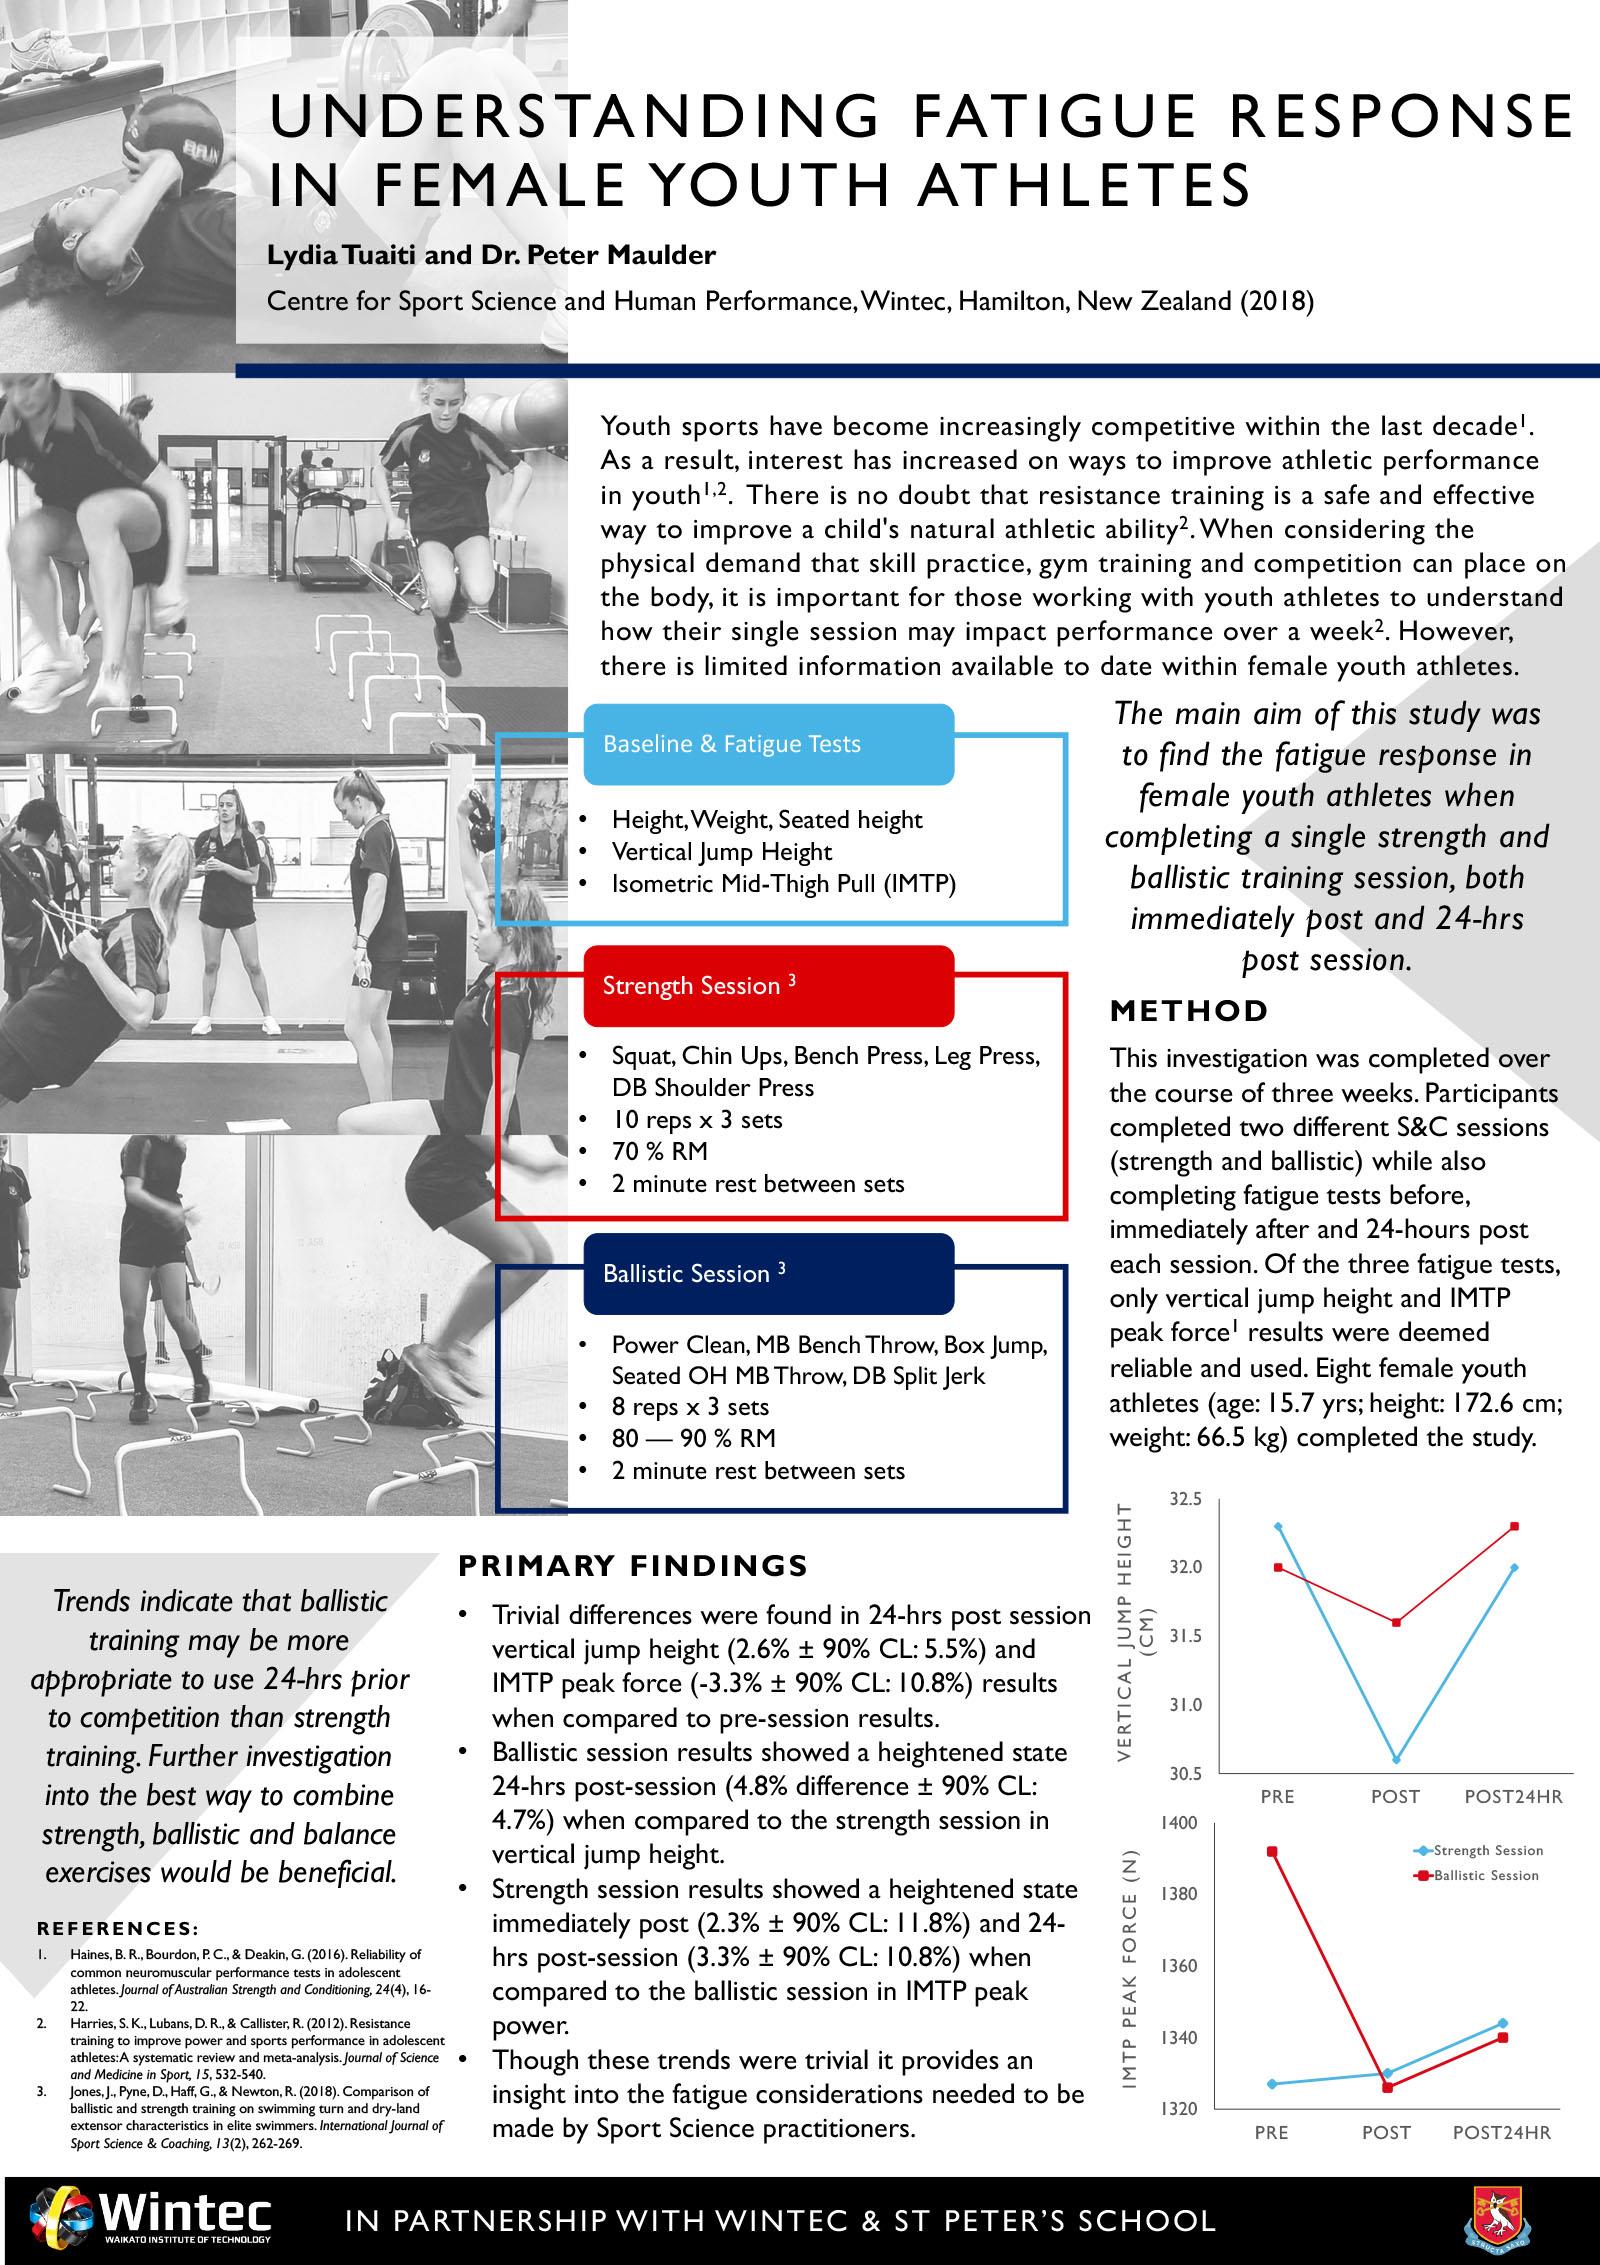 Understanding fatigue response in female youth athletes